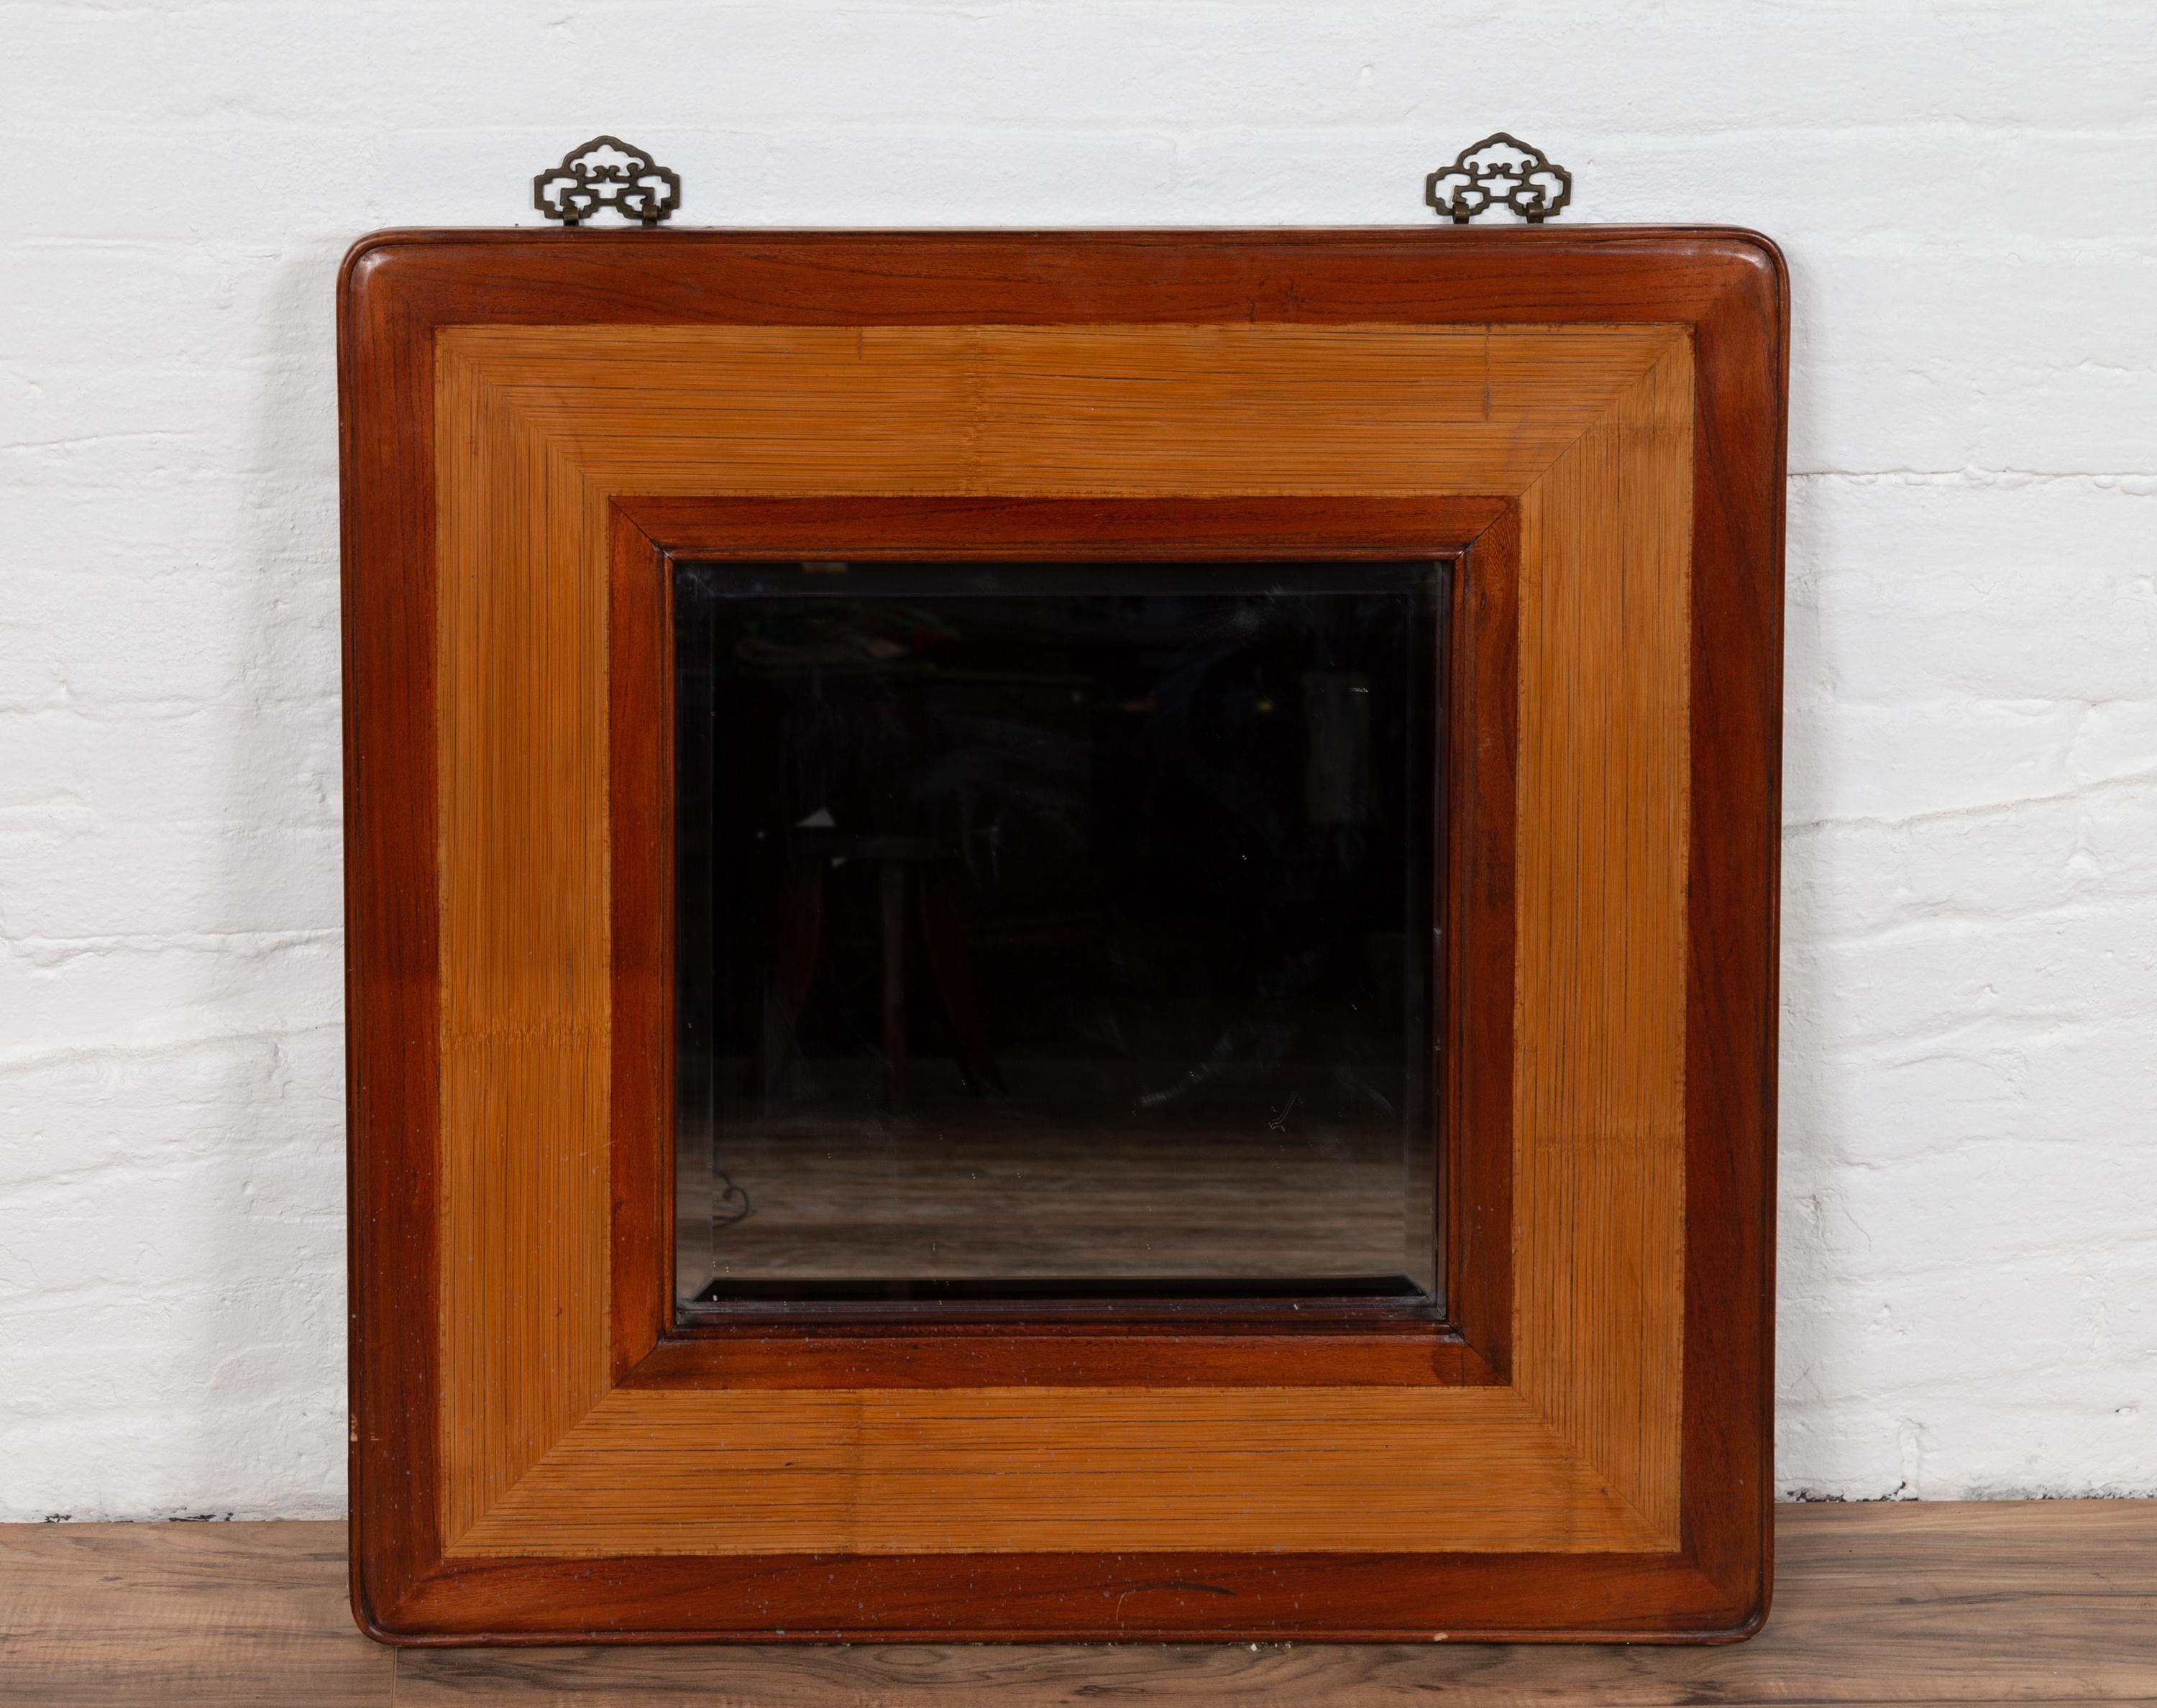 A vintage Chinese square mirror from the mid-20th century, with beveled glass, elm frame and rattan accents. Born in China during the mid-century period, this charming mirror features a simple square silhouette, accented with the two-toned contrast